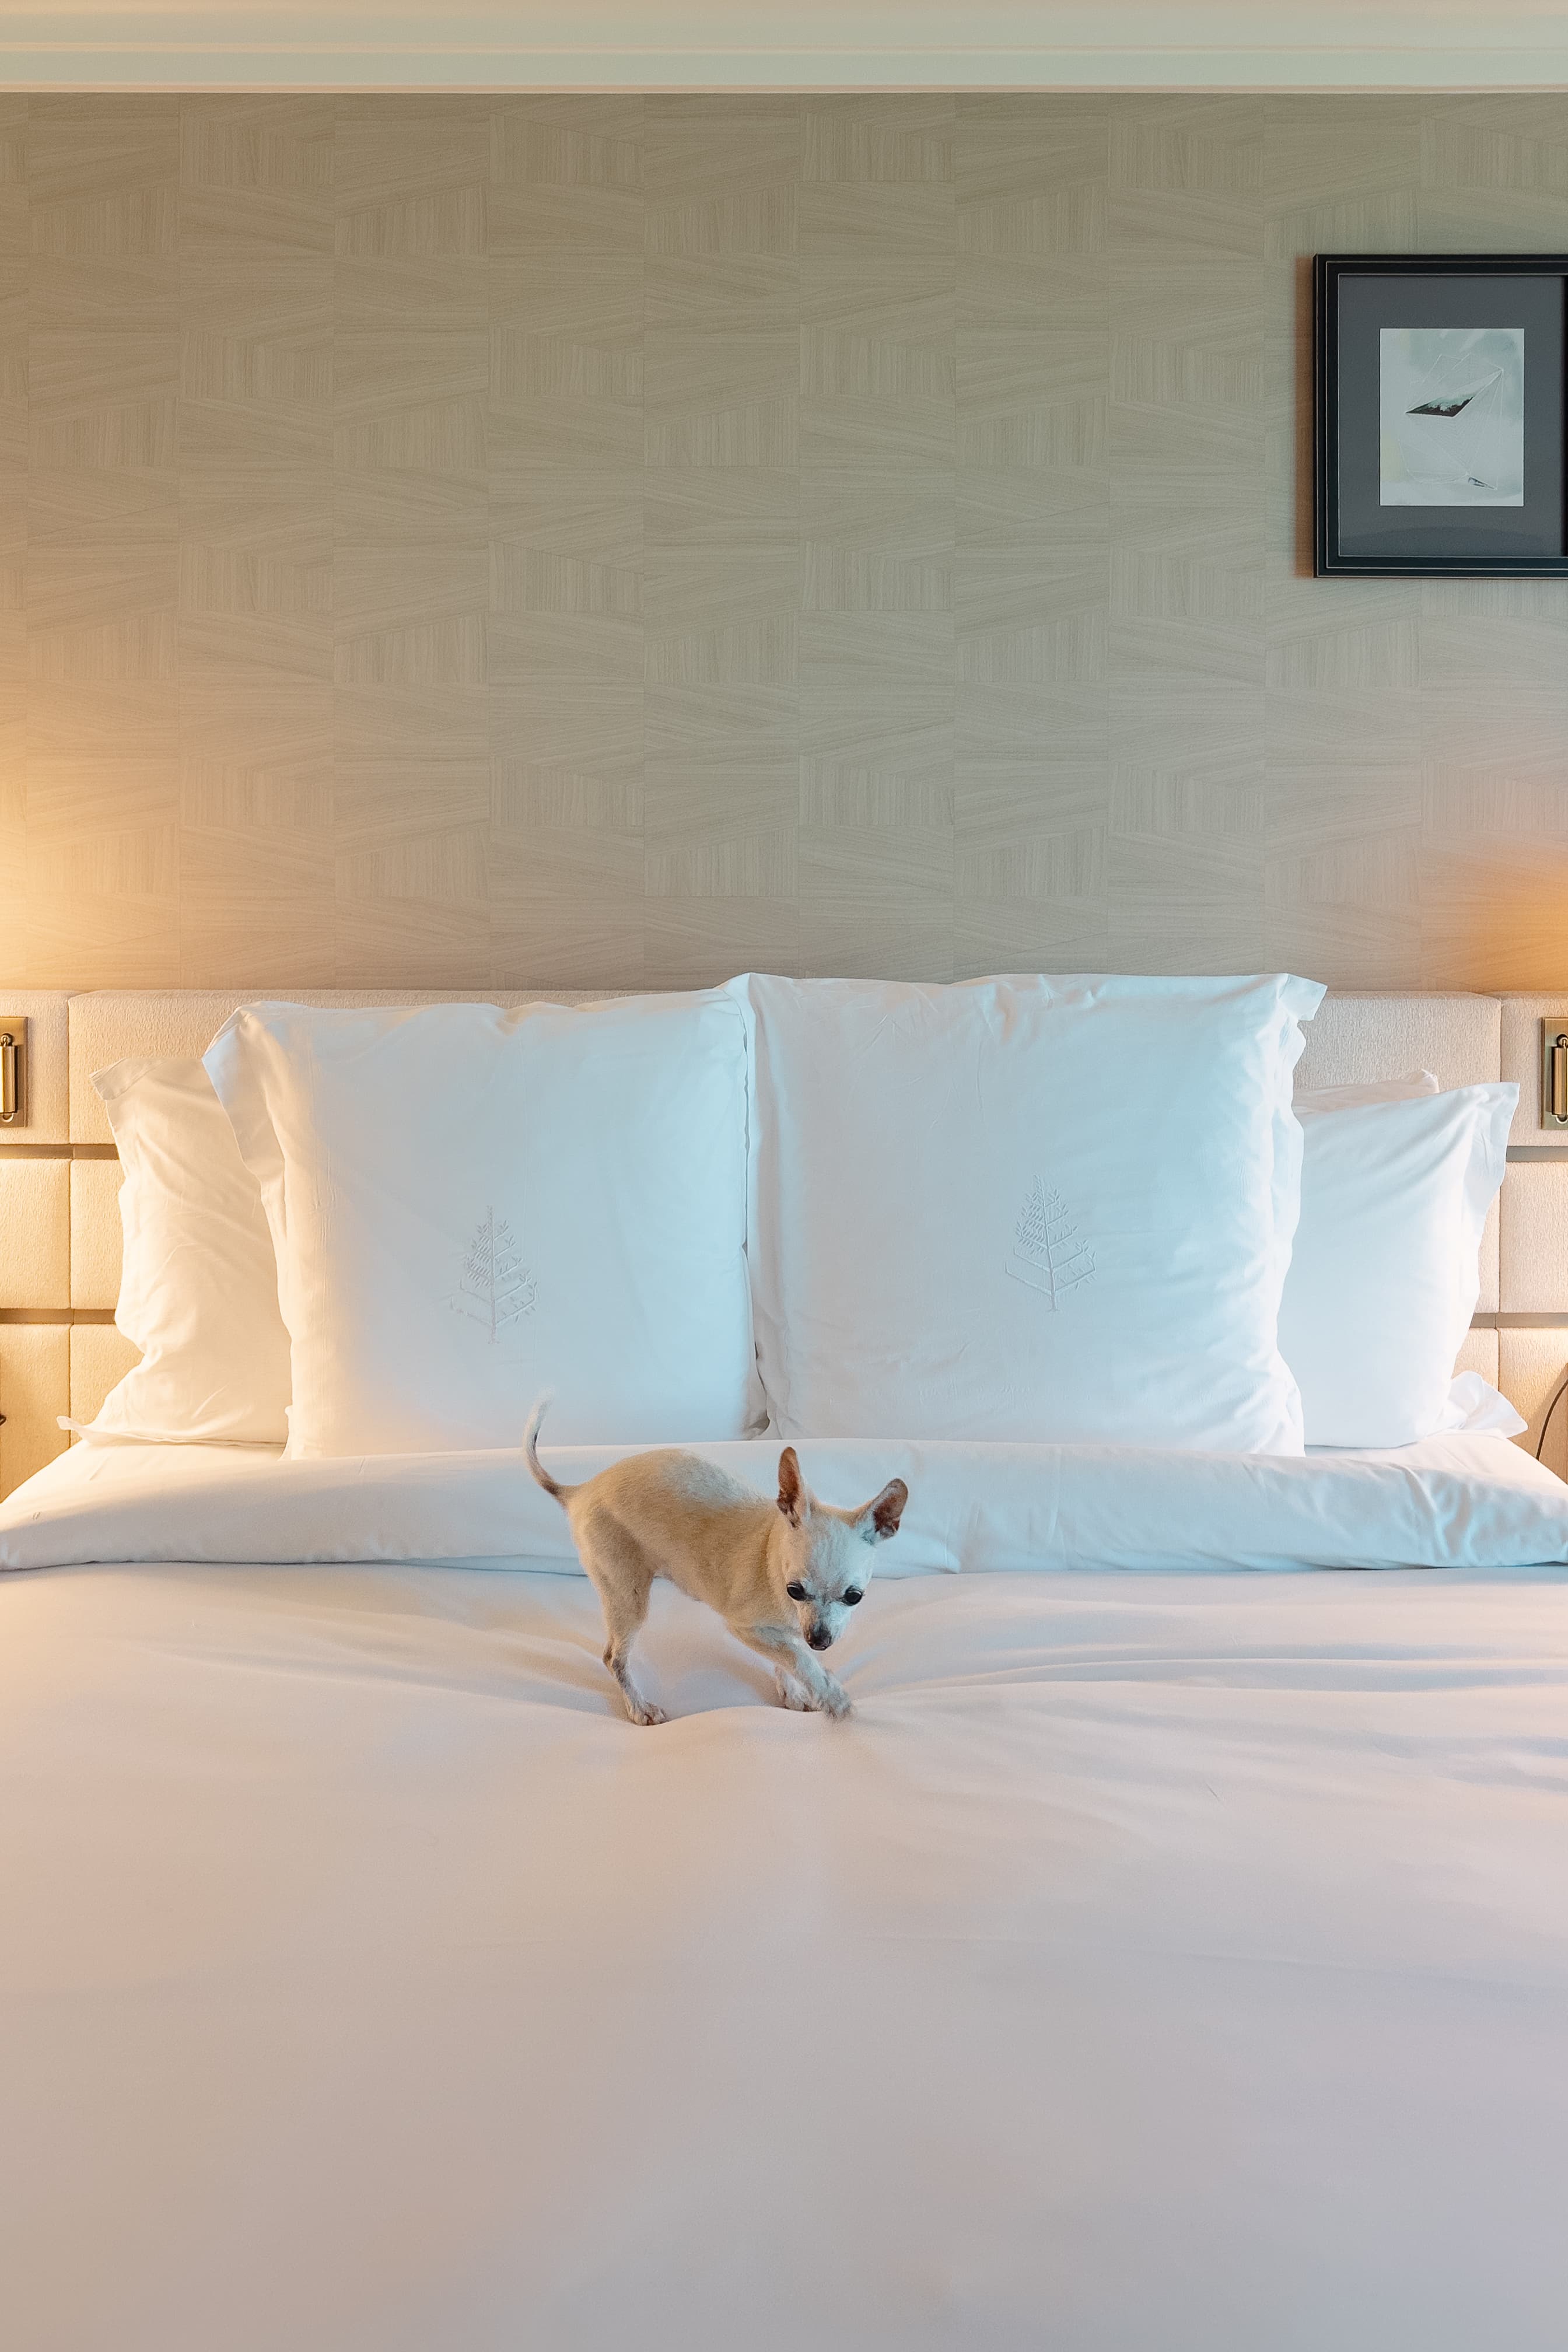 A small, light-colored Chihuaha dog on a large, neatly made bed with plush pillows against a textured wall with a framed picture of a paper plane.